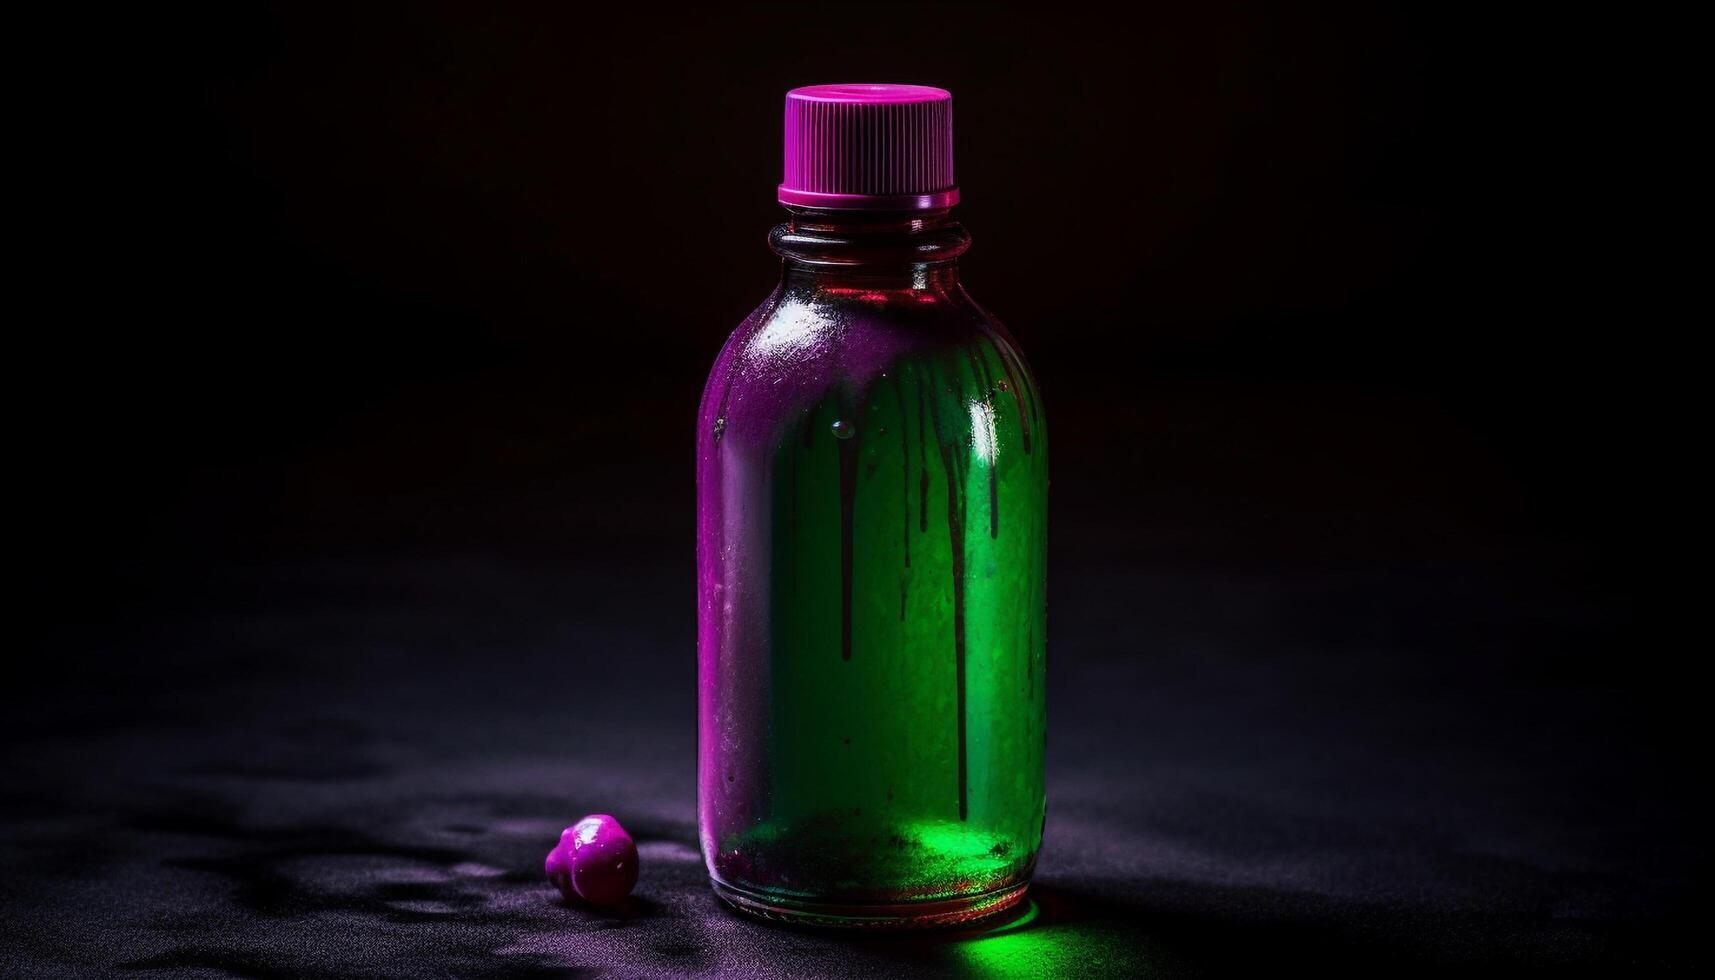 Transparent glass bottle with purple liquid for aromatherapy medicine generated by AI photo